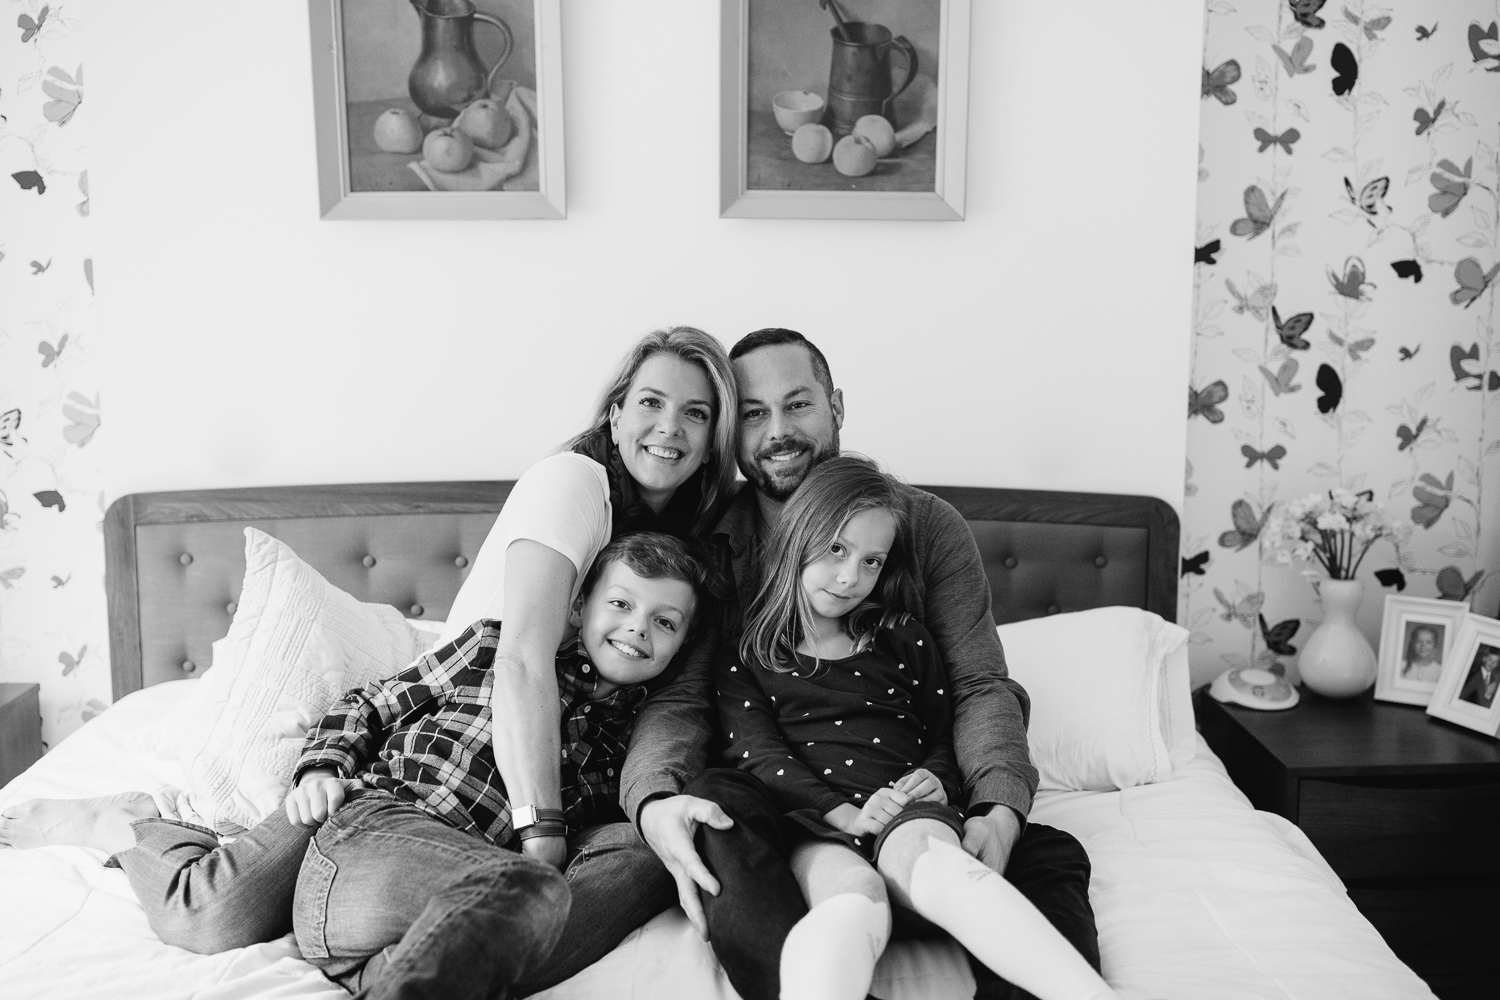 family of 4 sitting on master bed, 7 year old girl sitting in dad's lap, 9 year old boy in mom's everyone looking at camera, smiling - York Region In-Home Photos